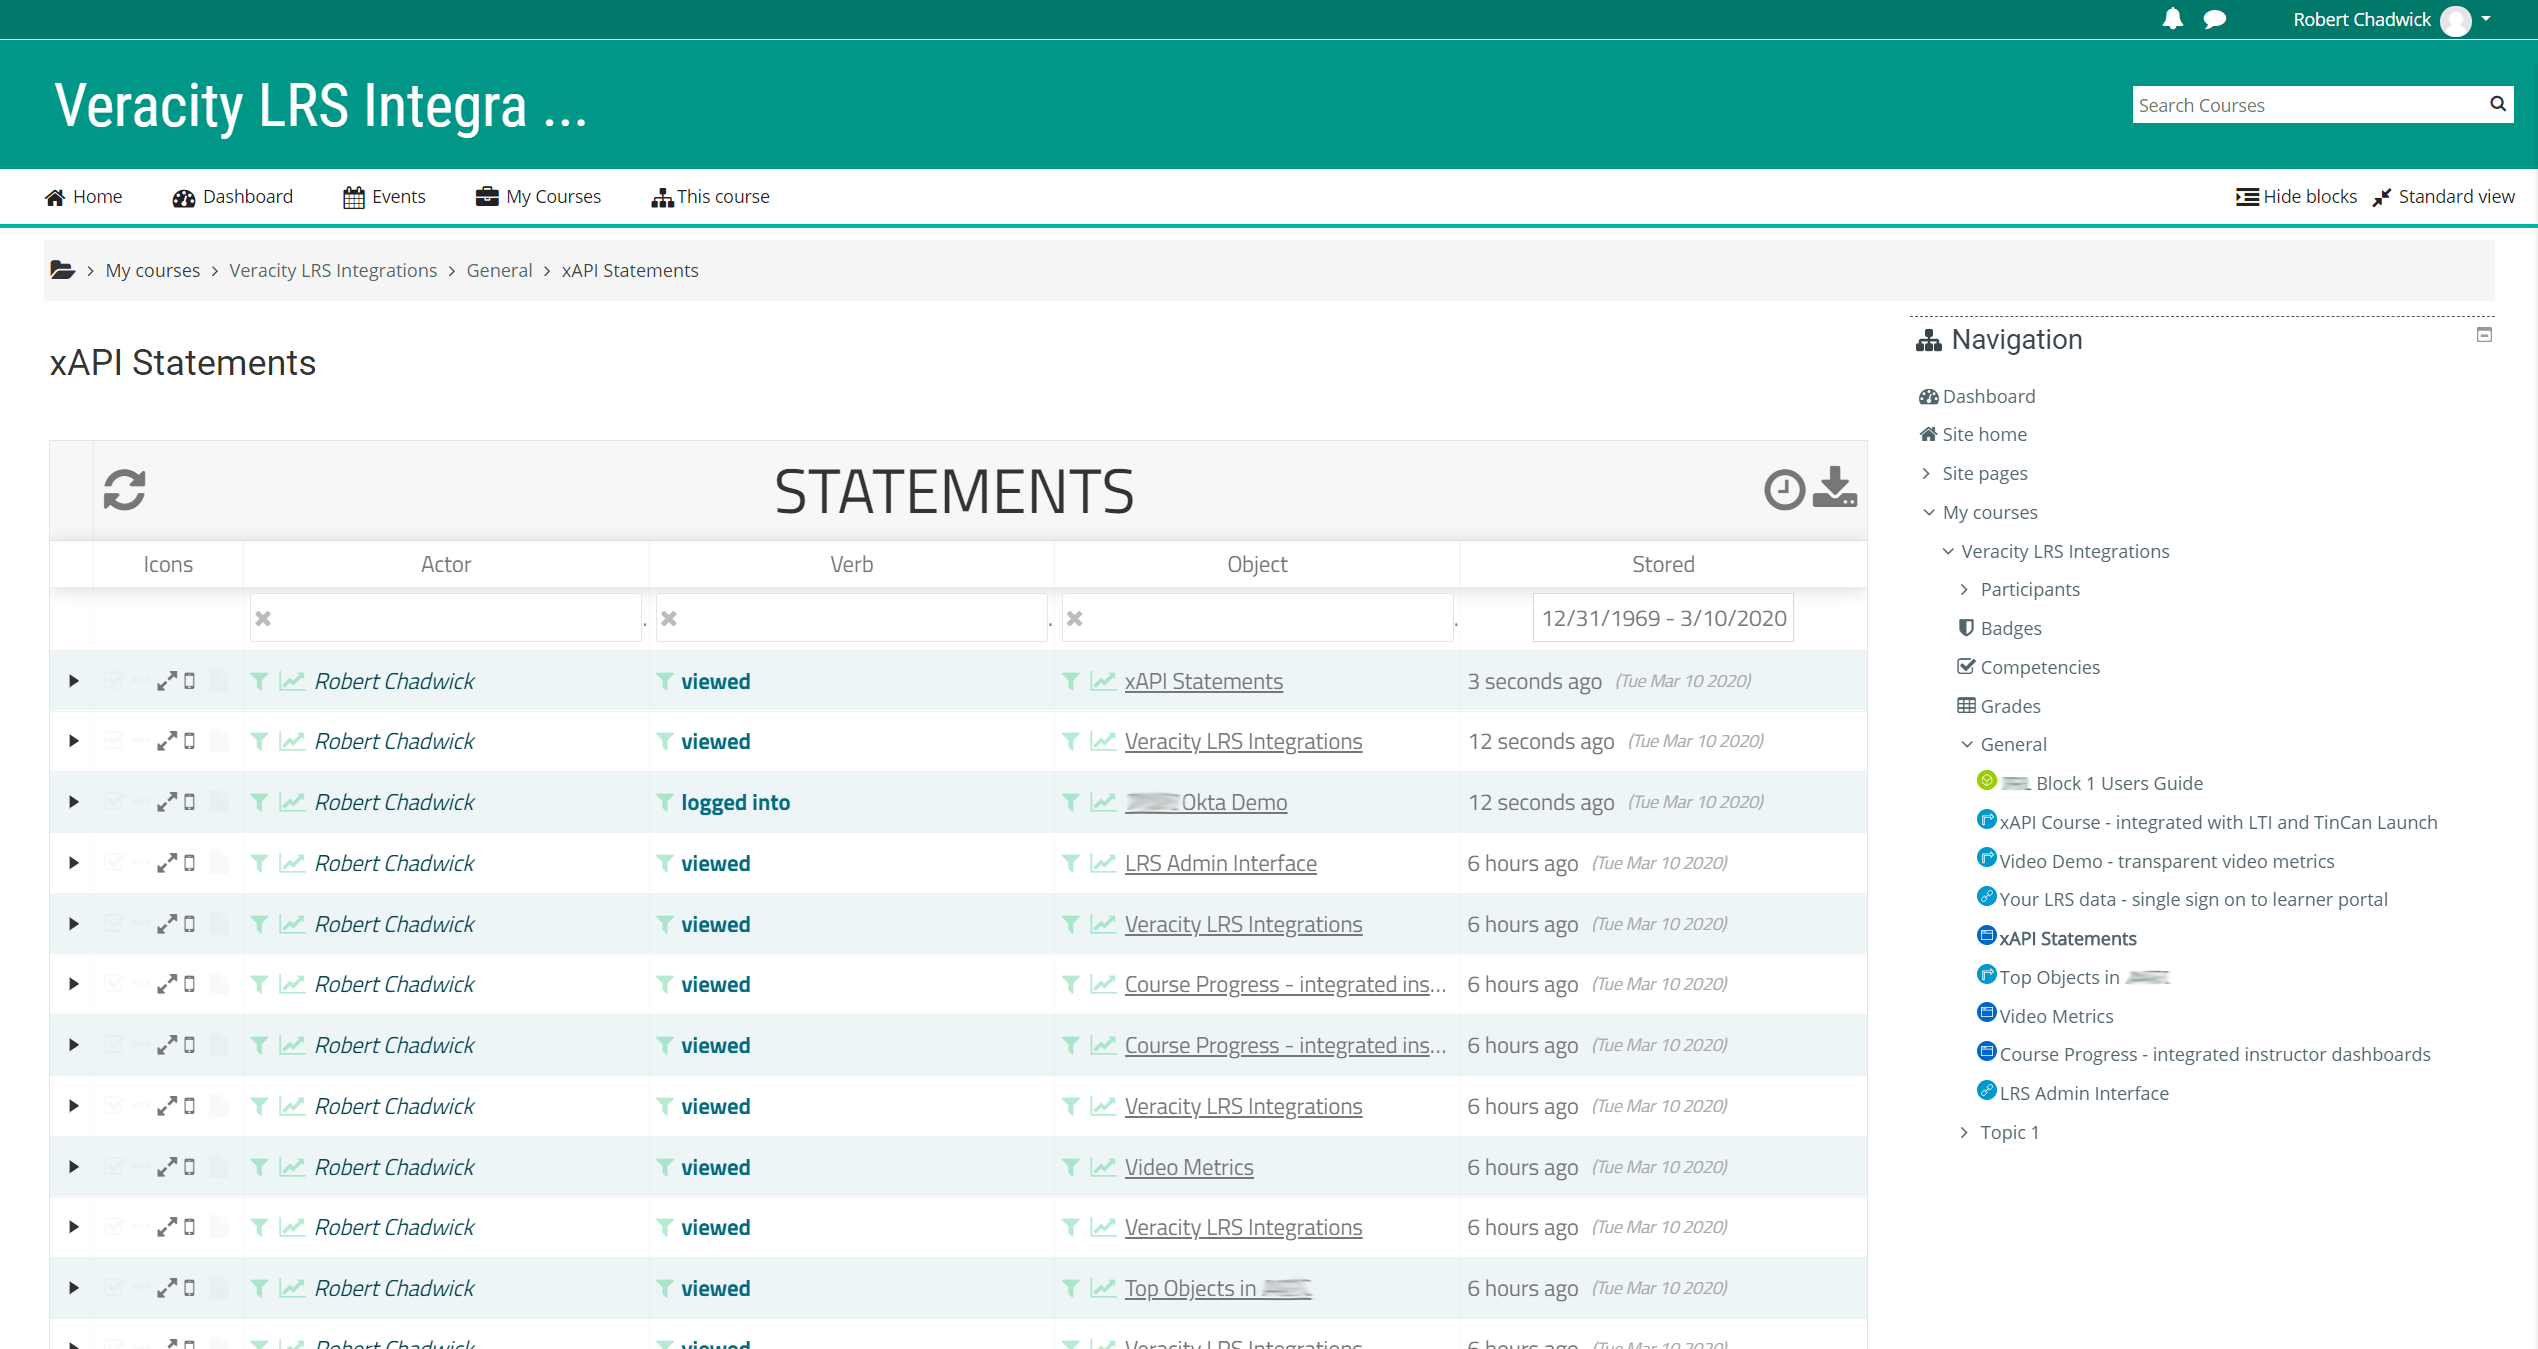 xAPI Statements in the LMS